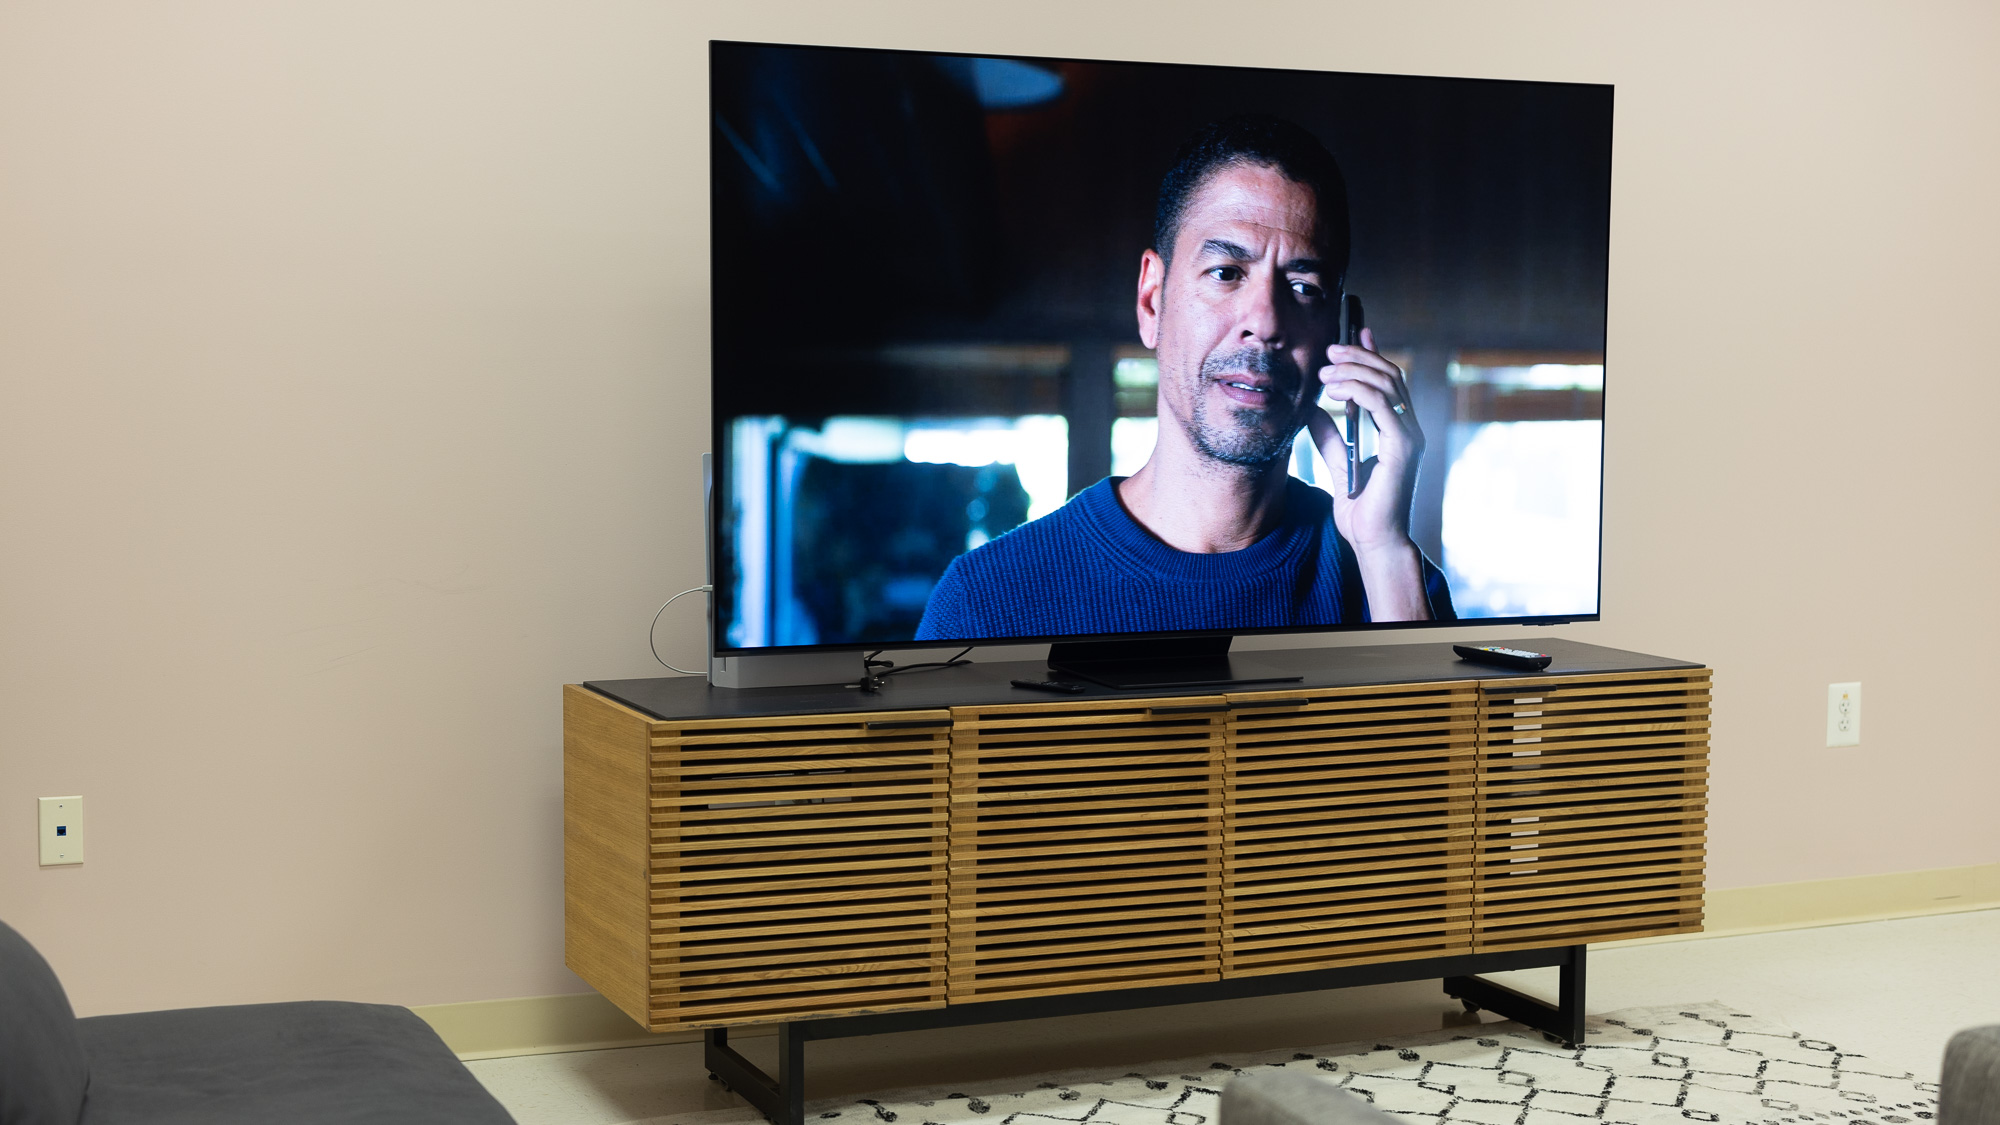 This 70-inch 4K TV is So Cheap it Could be a Mistake